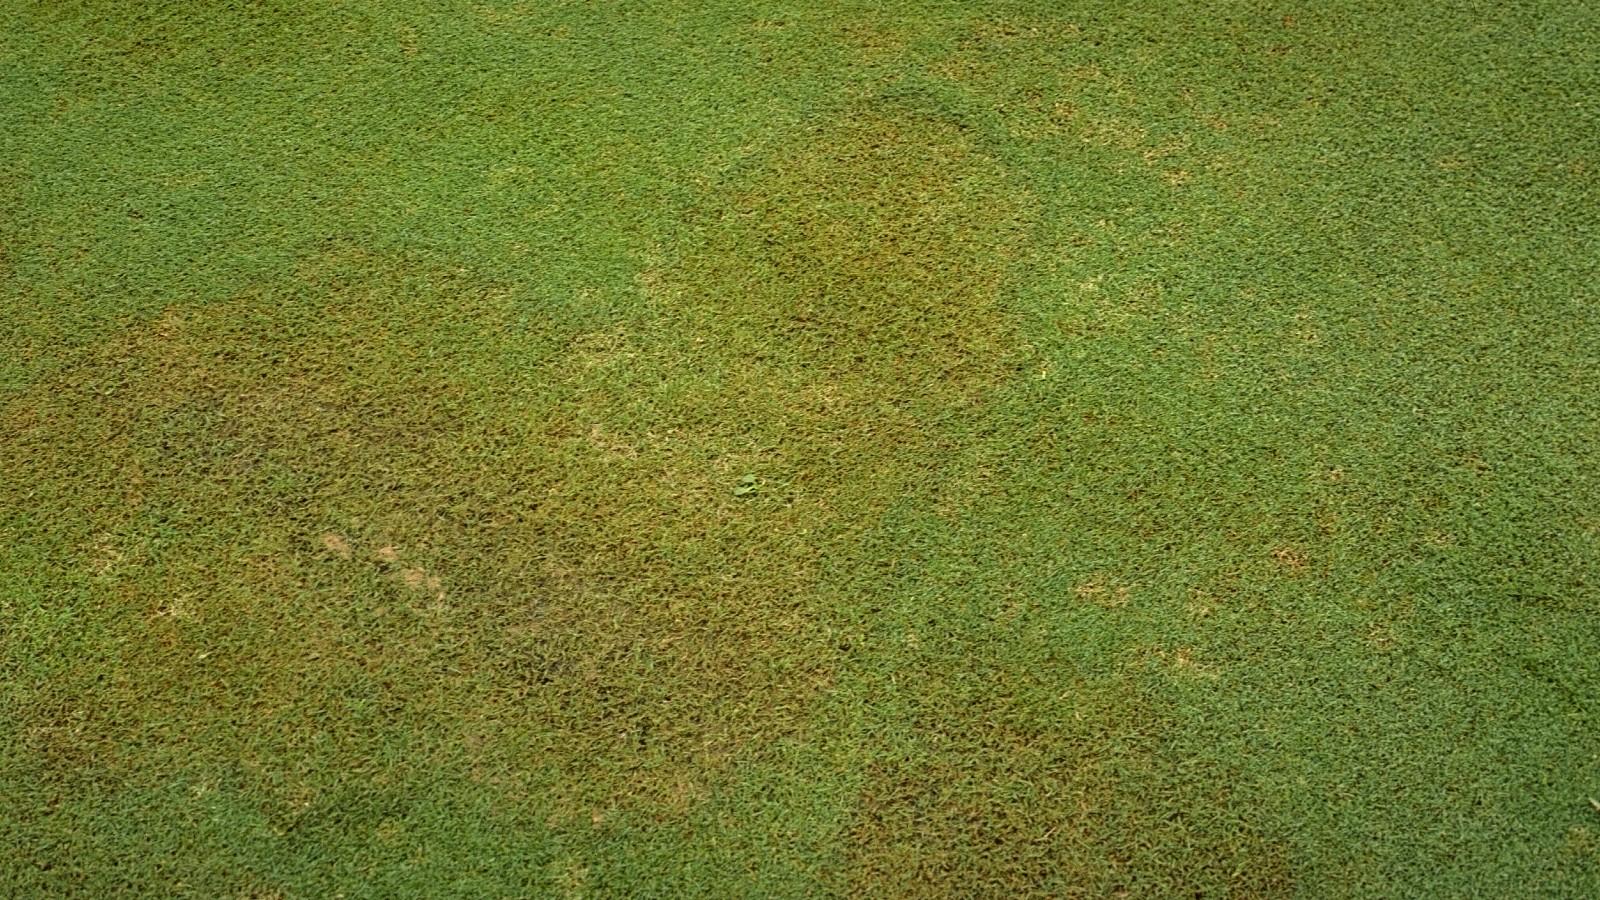 halo symptoms of brown patch on turf